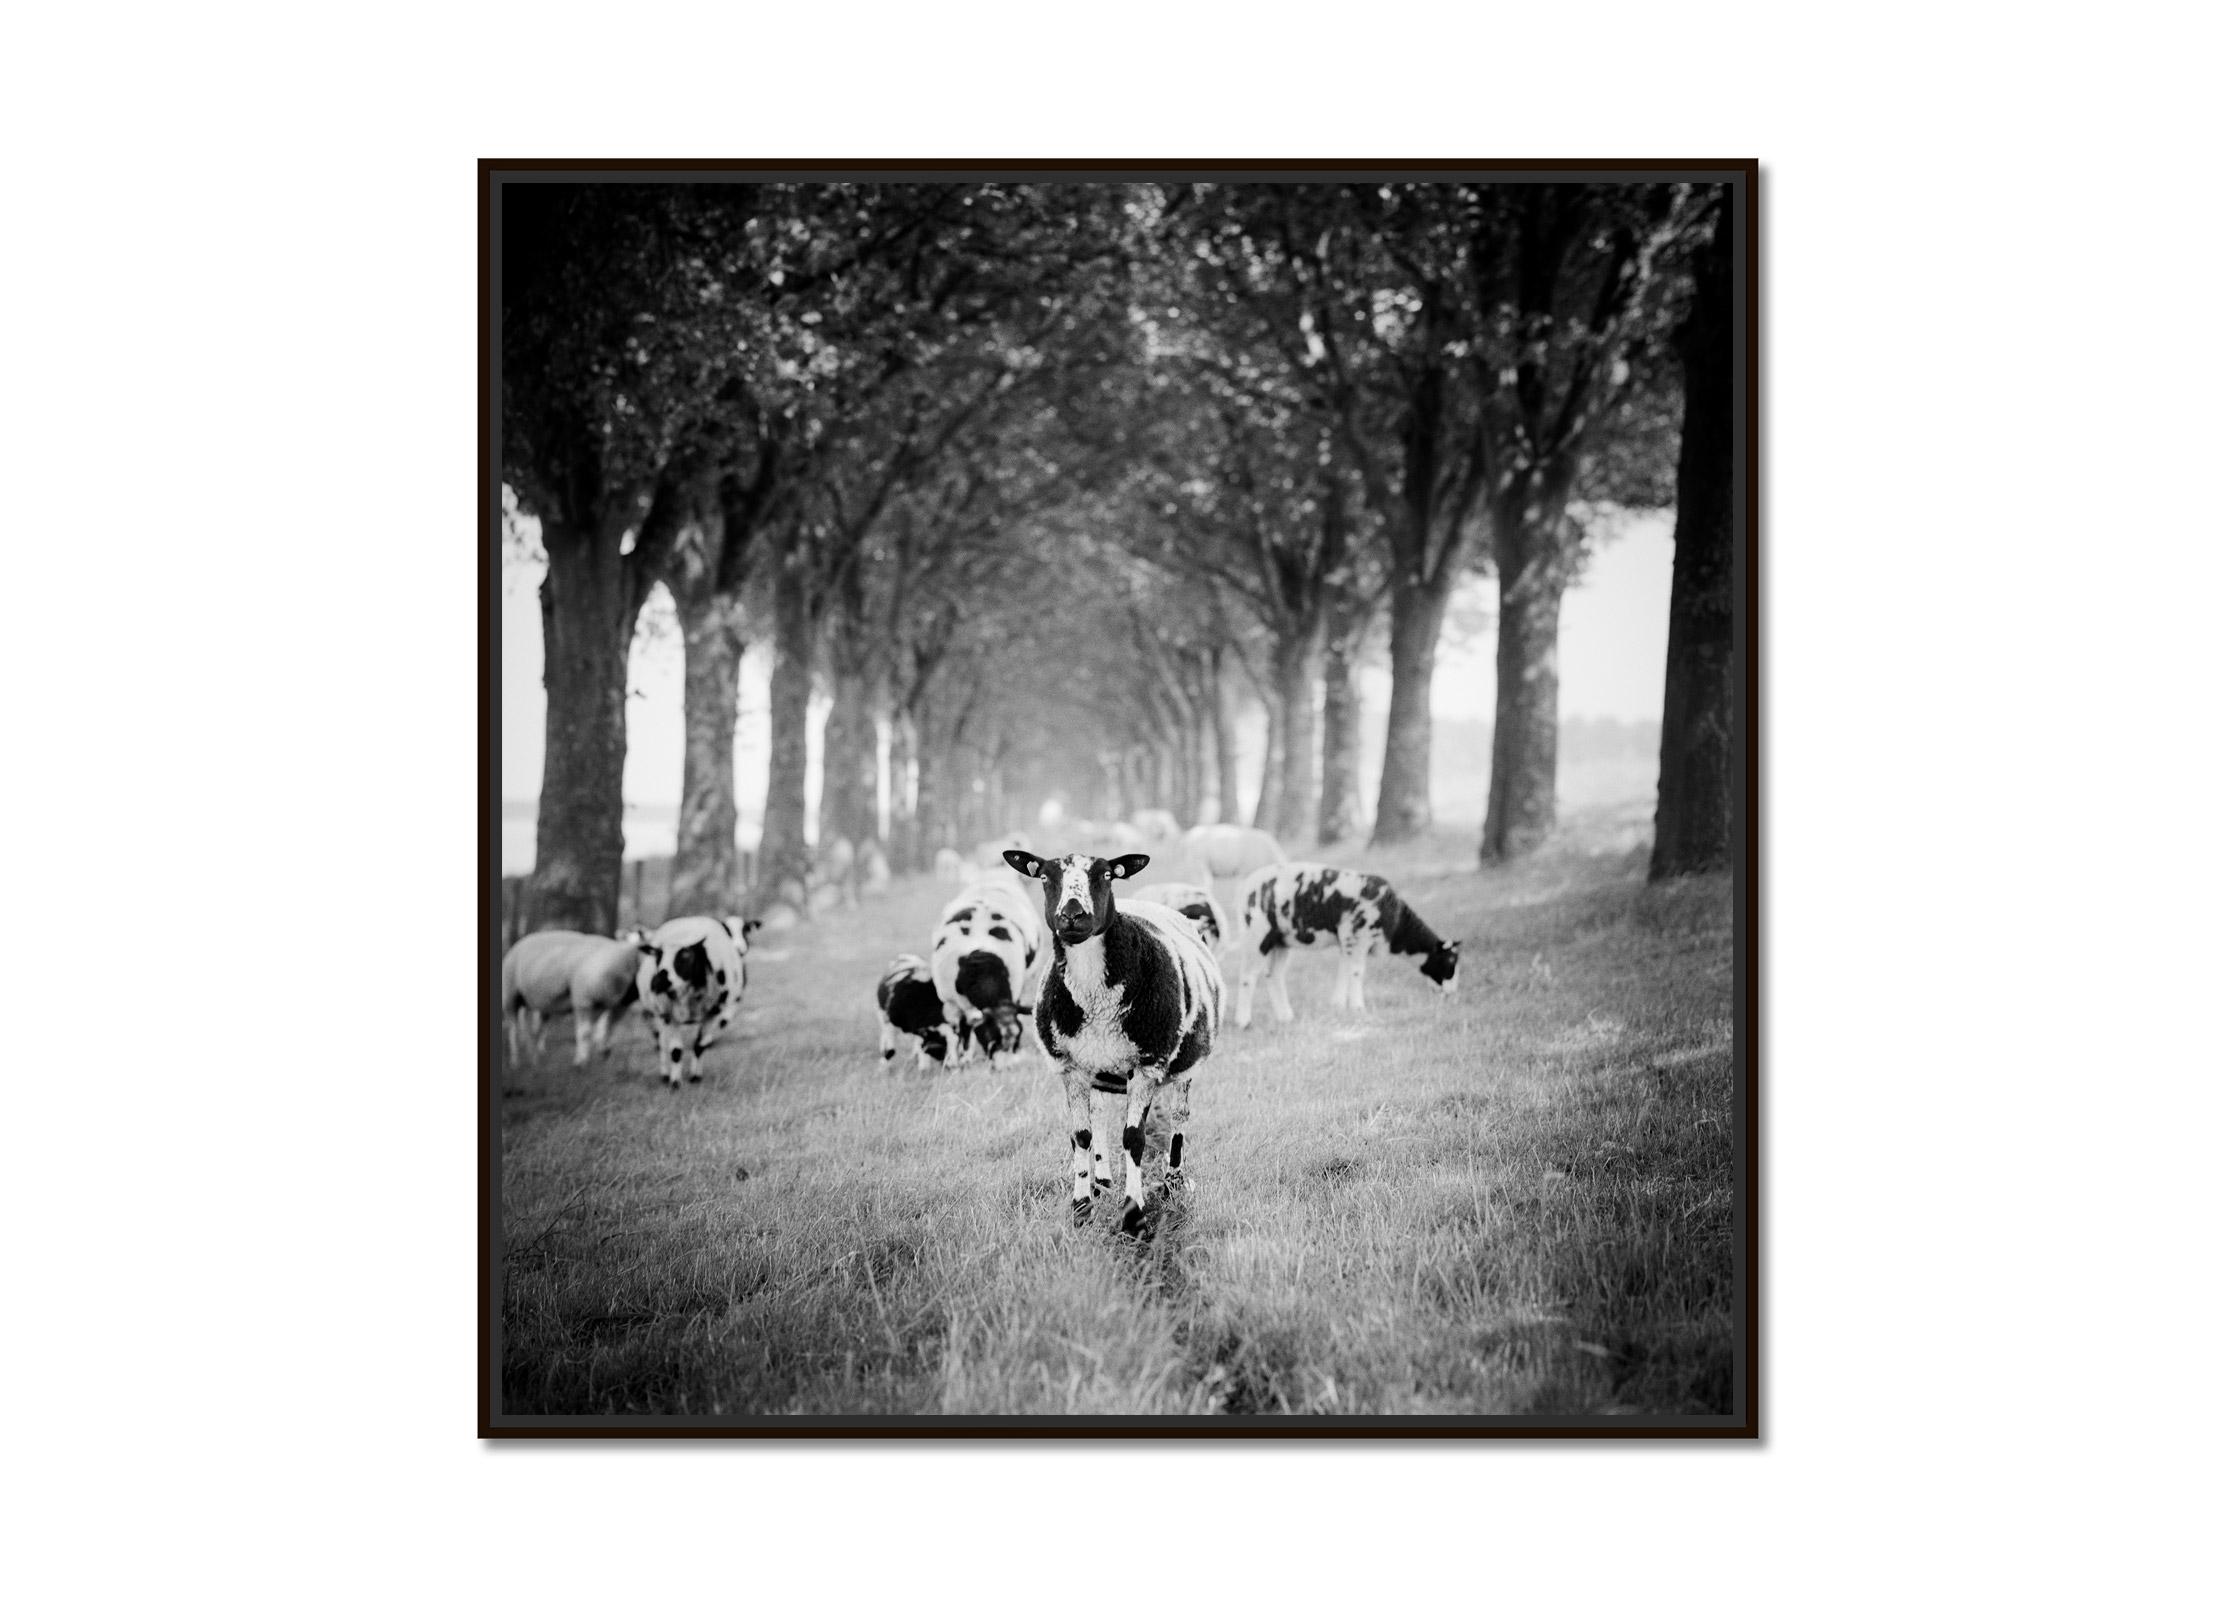 Shaun the Sheep, Tree Avenue, black and white photography, fine art, landscape - Photograph by Gerald Berghammer